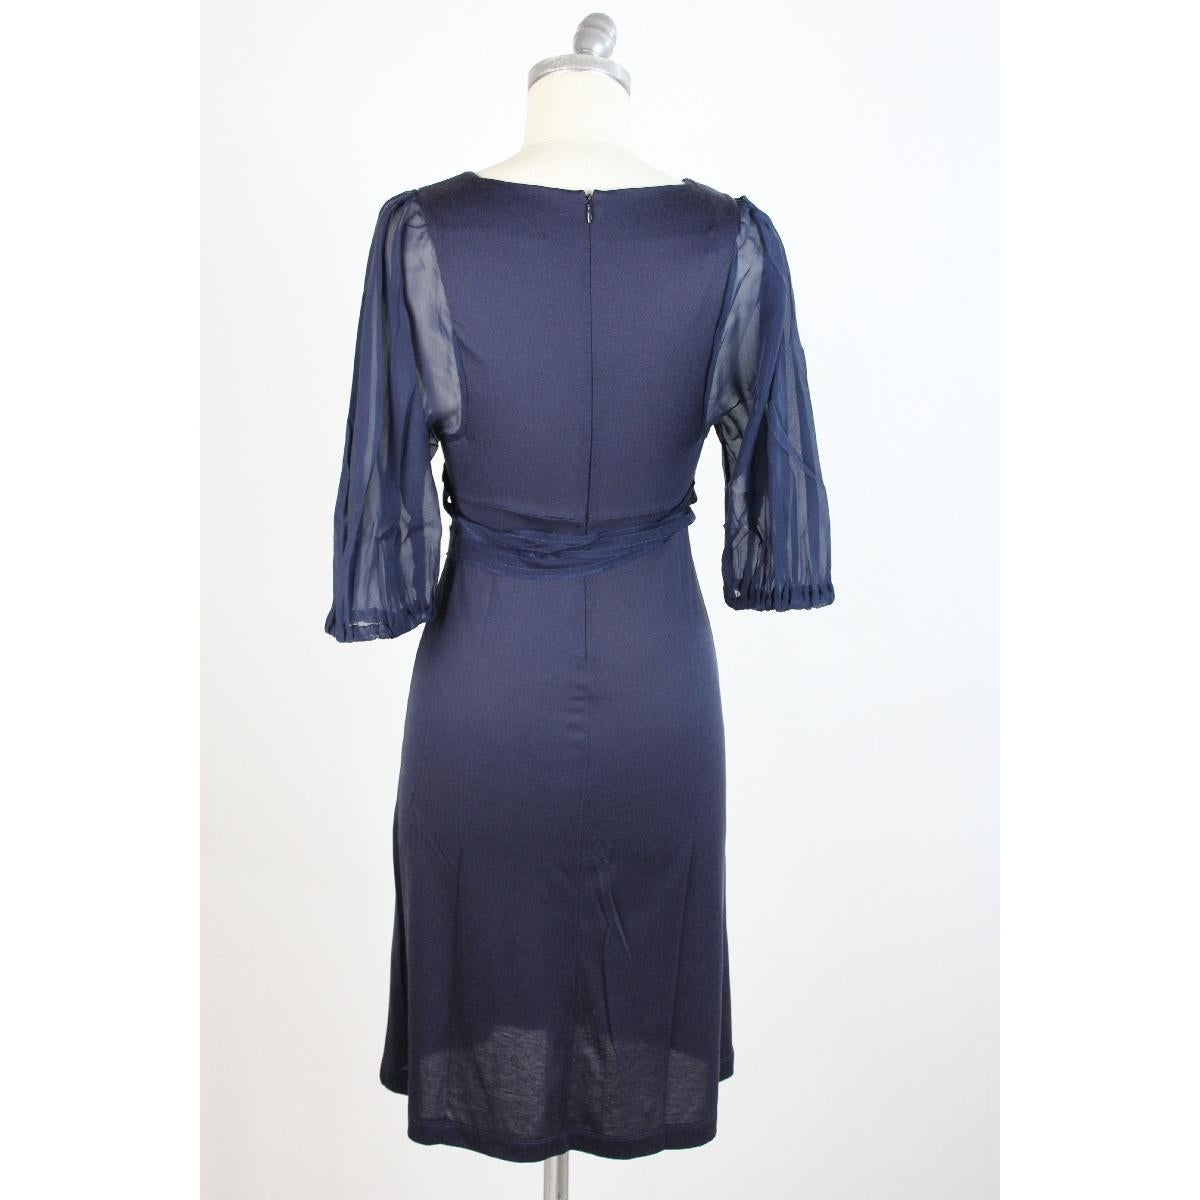 Philosophy by Alberta Ferretti flared dress in blue cotton, balloon sleeves, soft belt, new with label, in very good condition, made in Italy.

SIZE 40 IT 6 US 8 UK

Shoulders: 40 cm
Sleeves: 43
Length: 95 cm
Bust / Chest: 42 cm